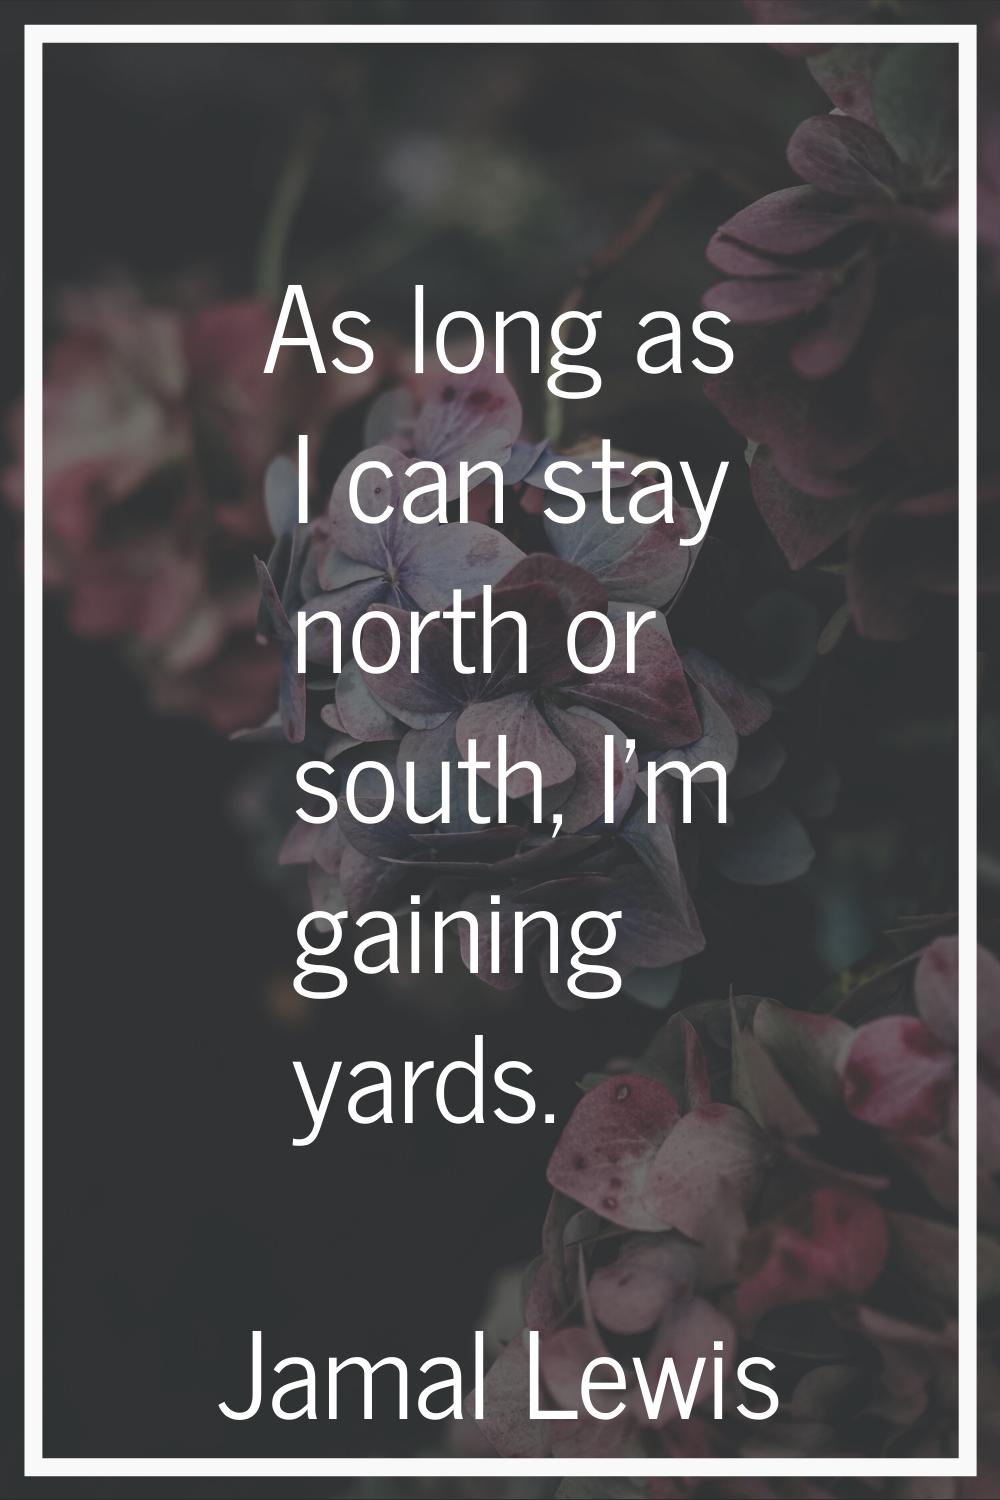 As long as I can stay north or south, I'm gaining yards.